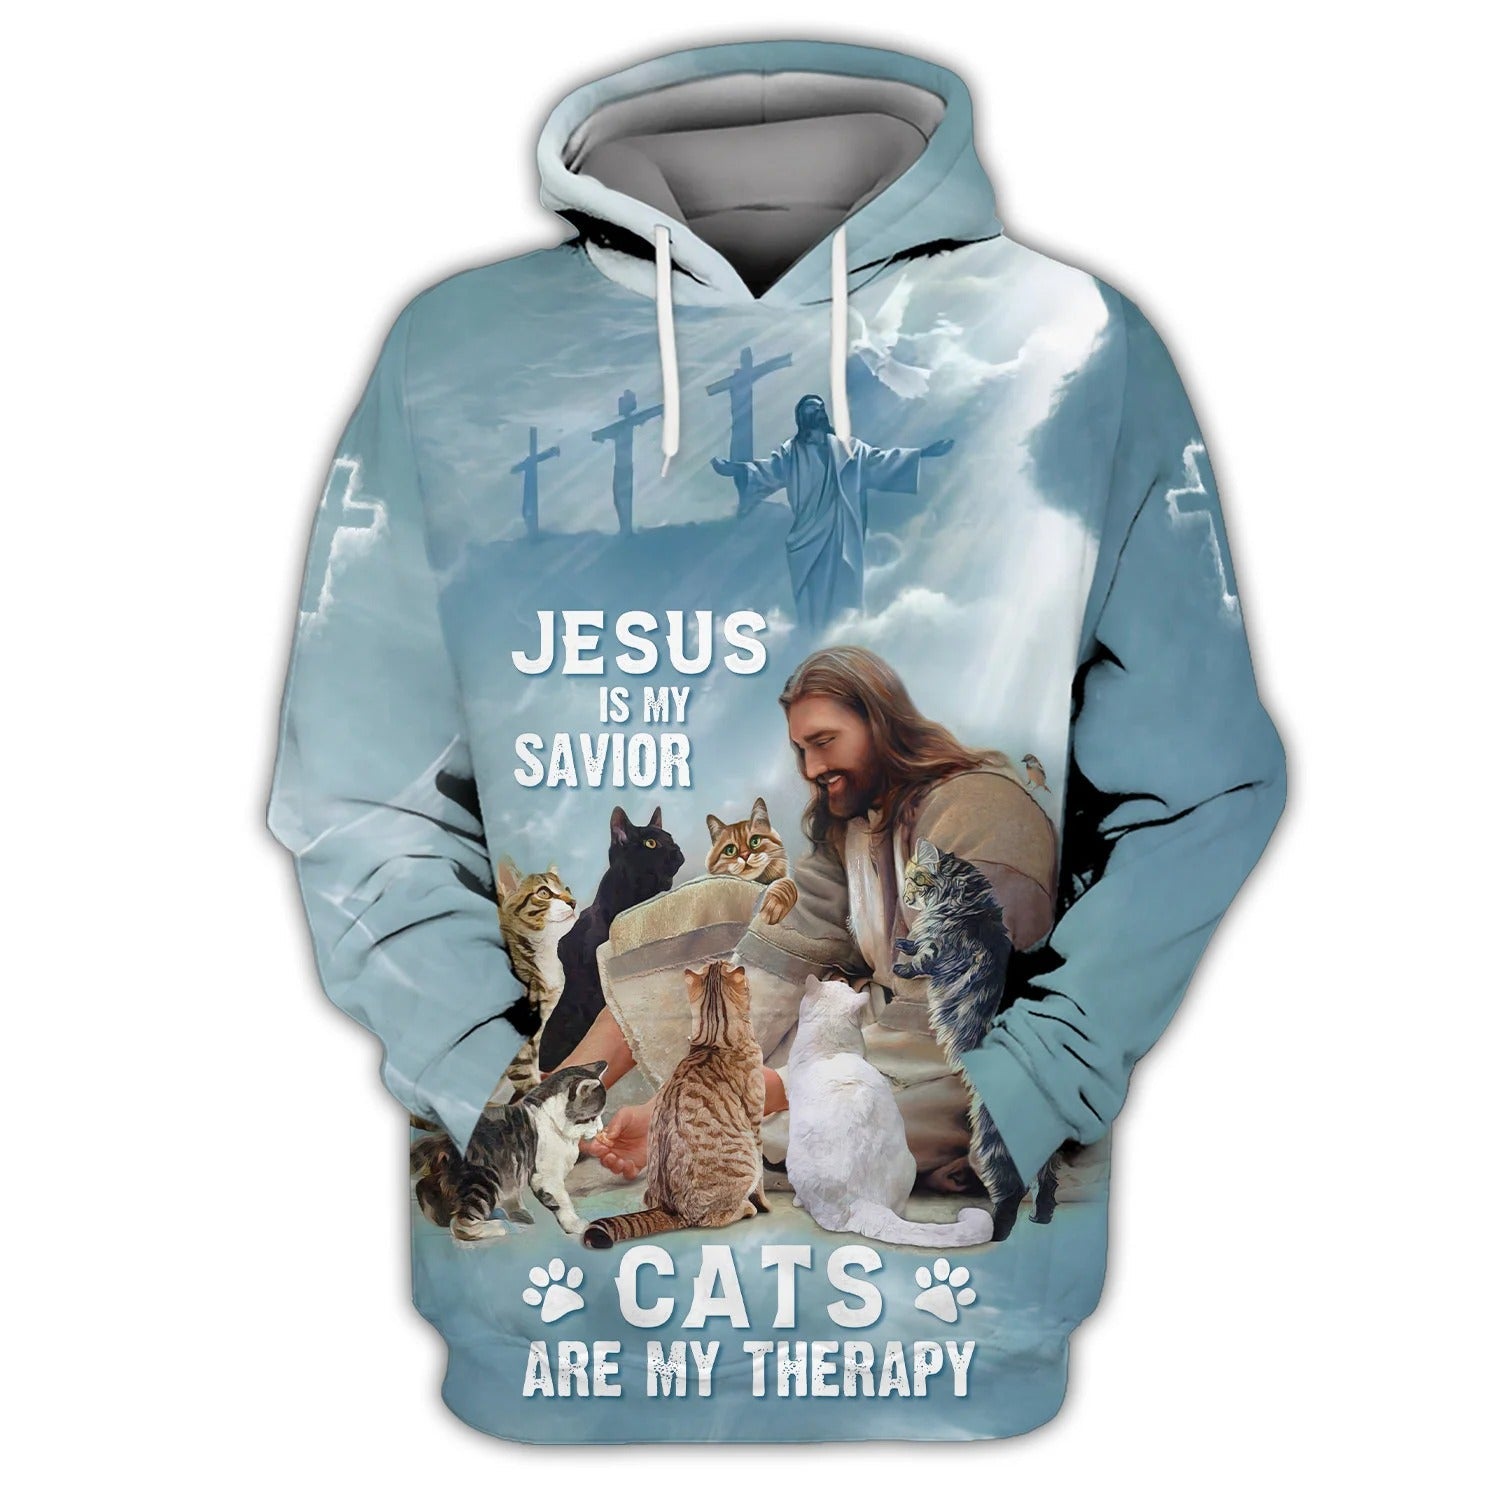 3D All Over Print Cat And Jesus Hoodie/ Jesus Is My Savior/ Cats are My Therapy Sweatshirt/ Cat Tee Shirt